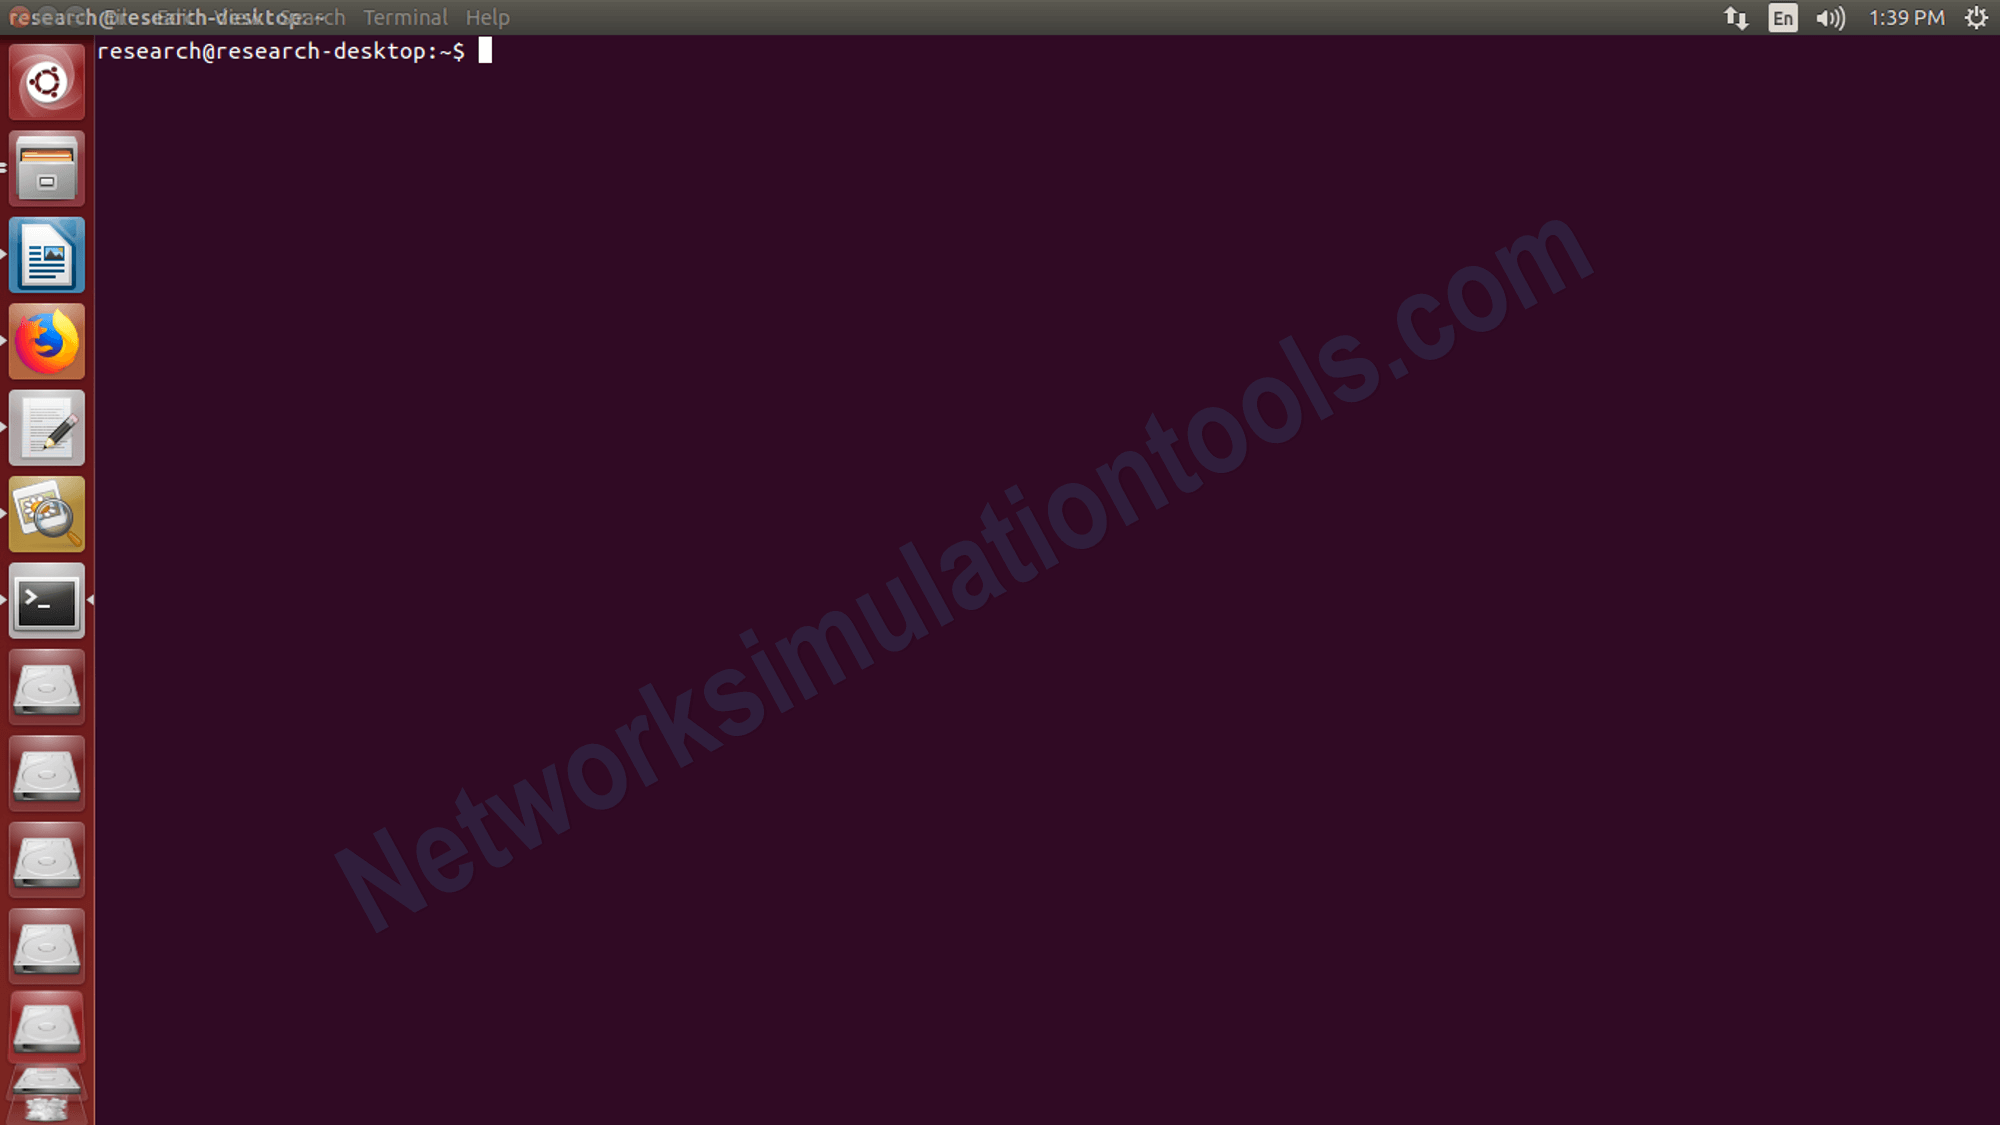 Open the terminal of installed software list